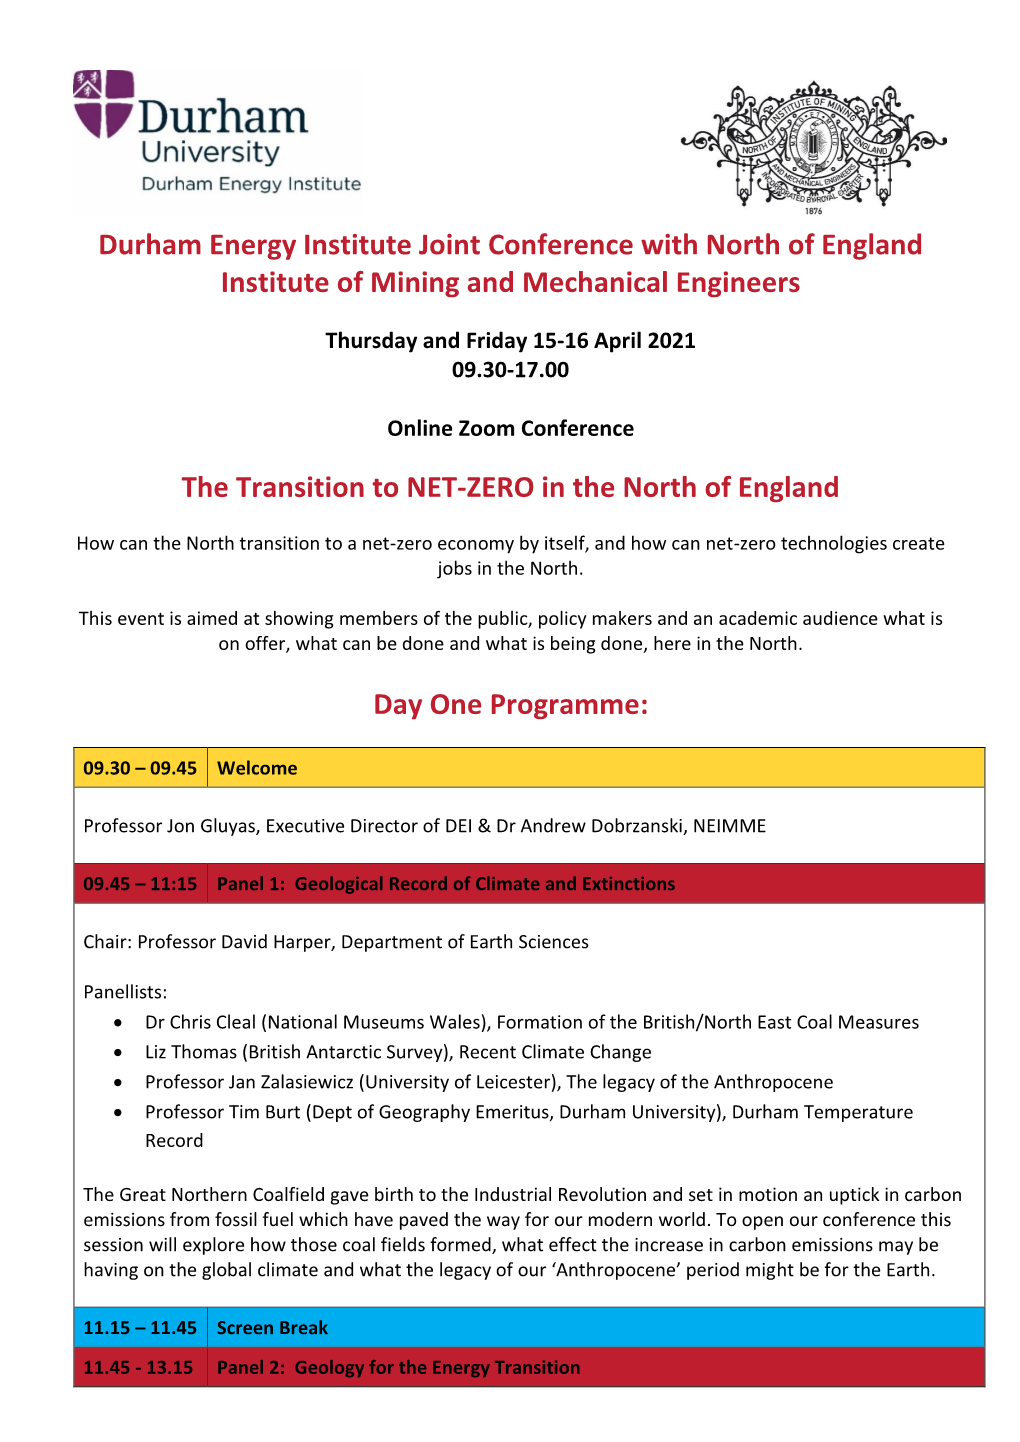 Durham Energy Institute Joint Conference with North of England Institute of Mining and Mechanical Engineers